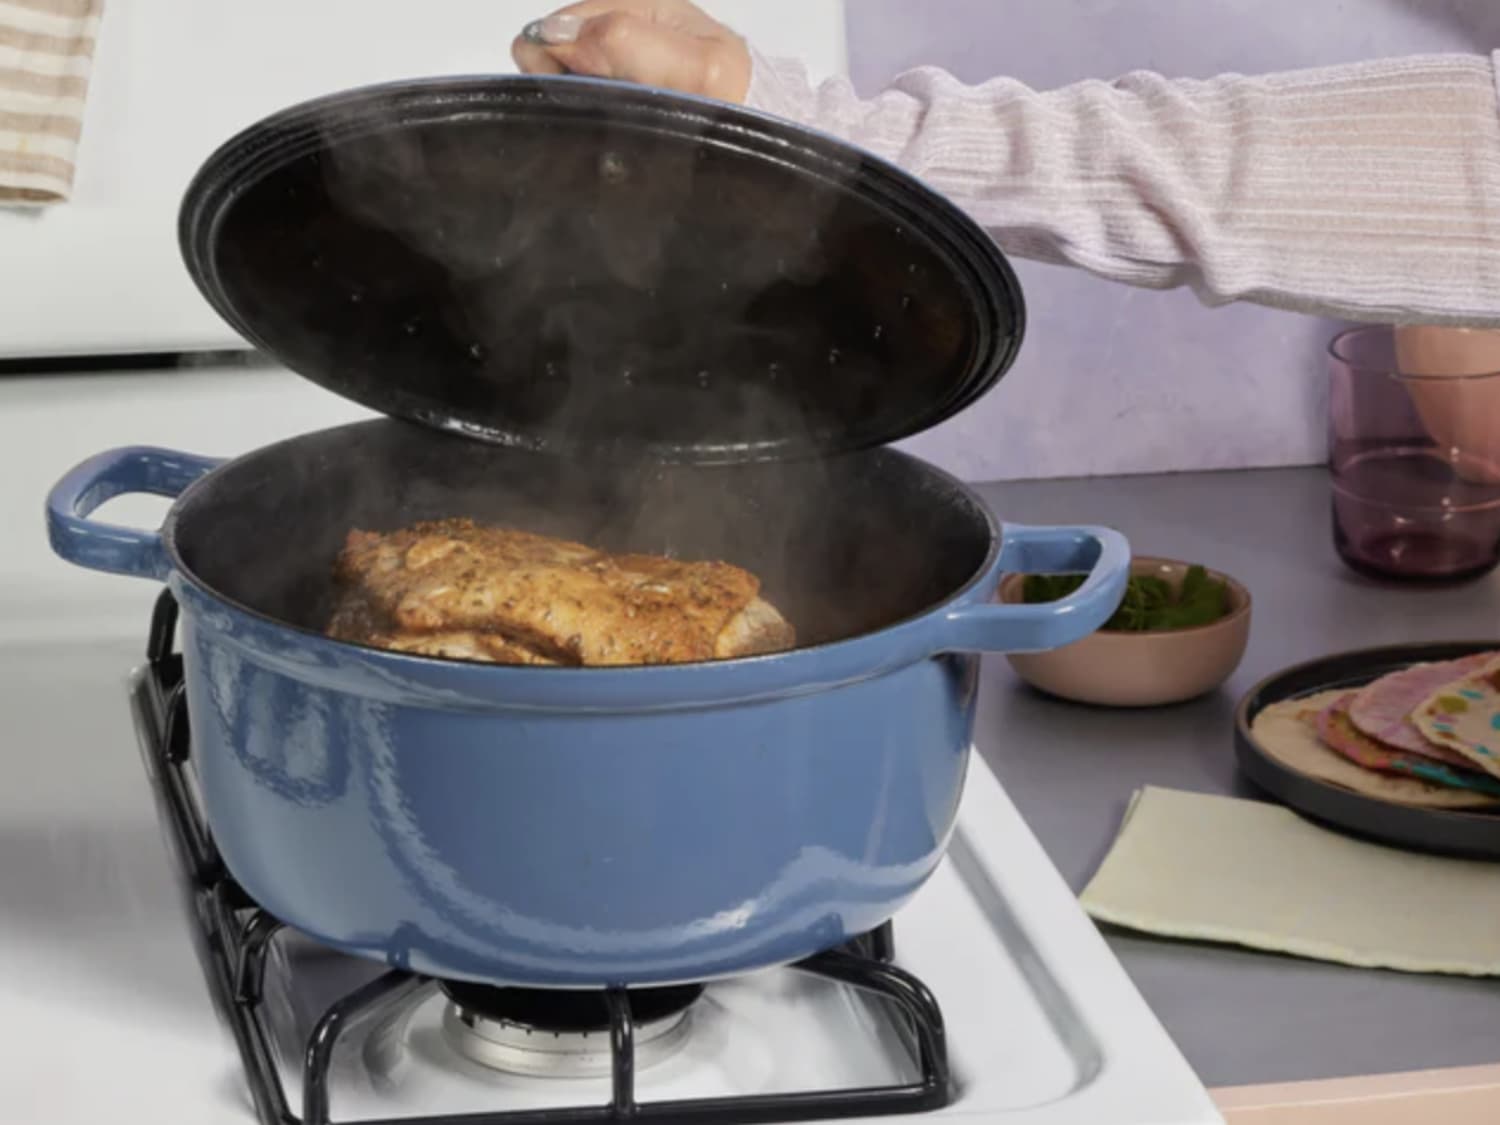 Where to buy Our Place's Always Pan - the viral 8-in-1 pan that's